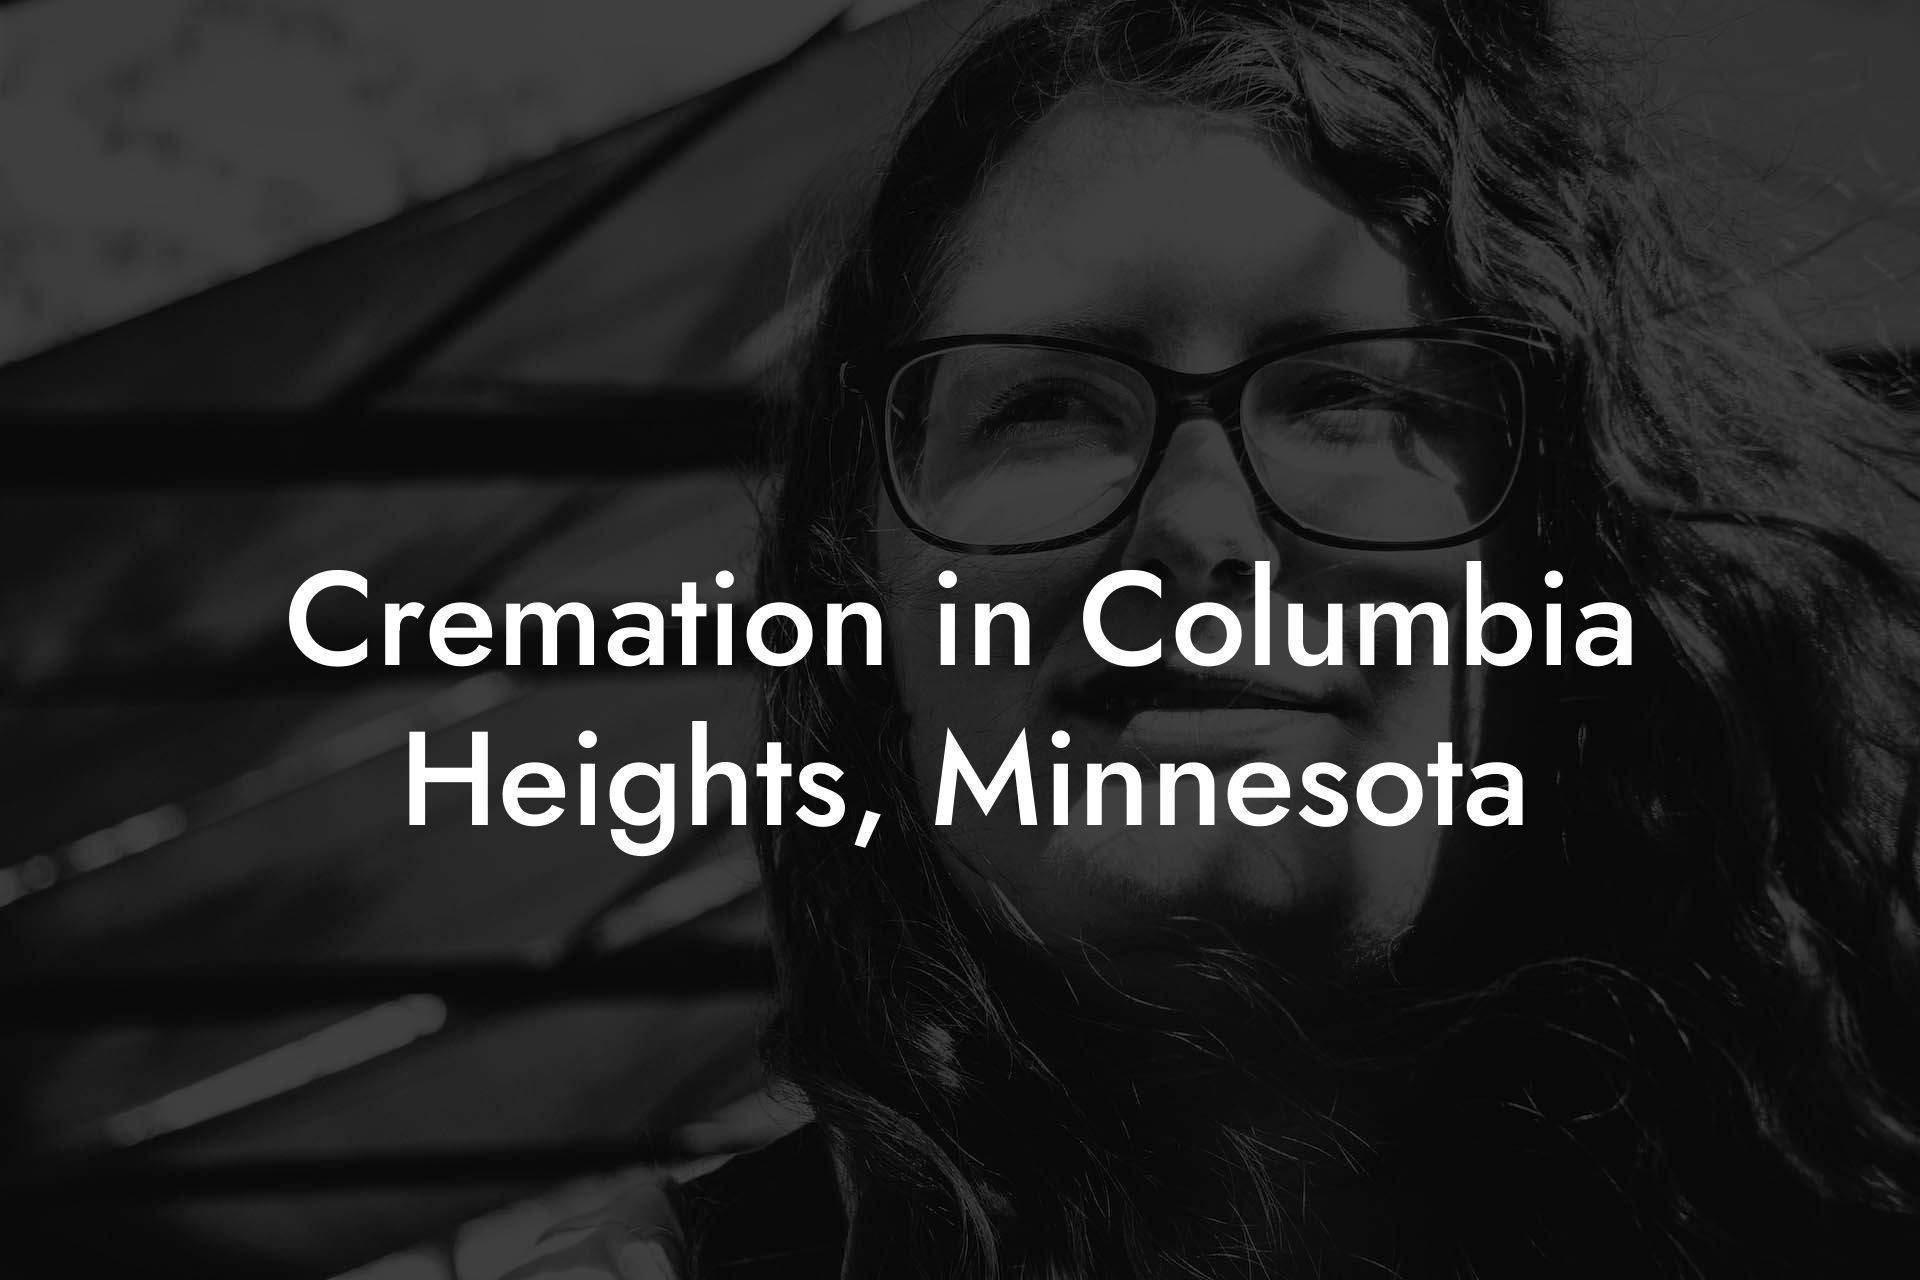 Cremation in Columbia Heights, Minnesota